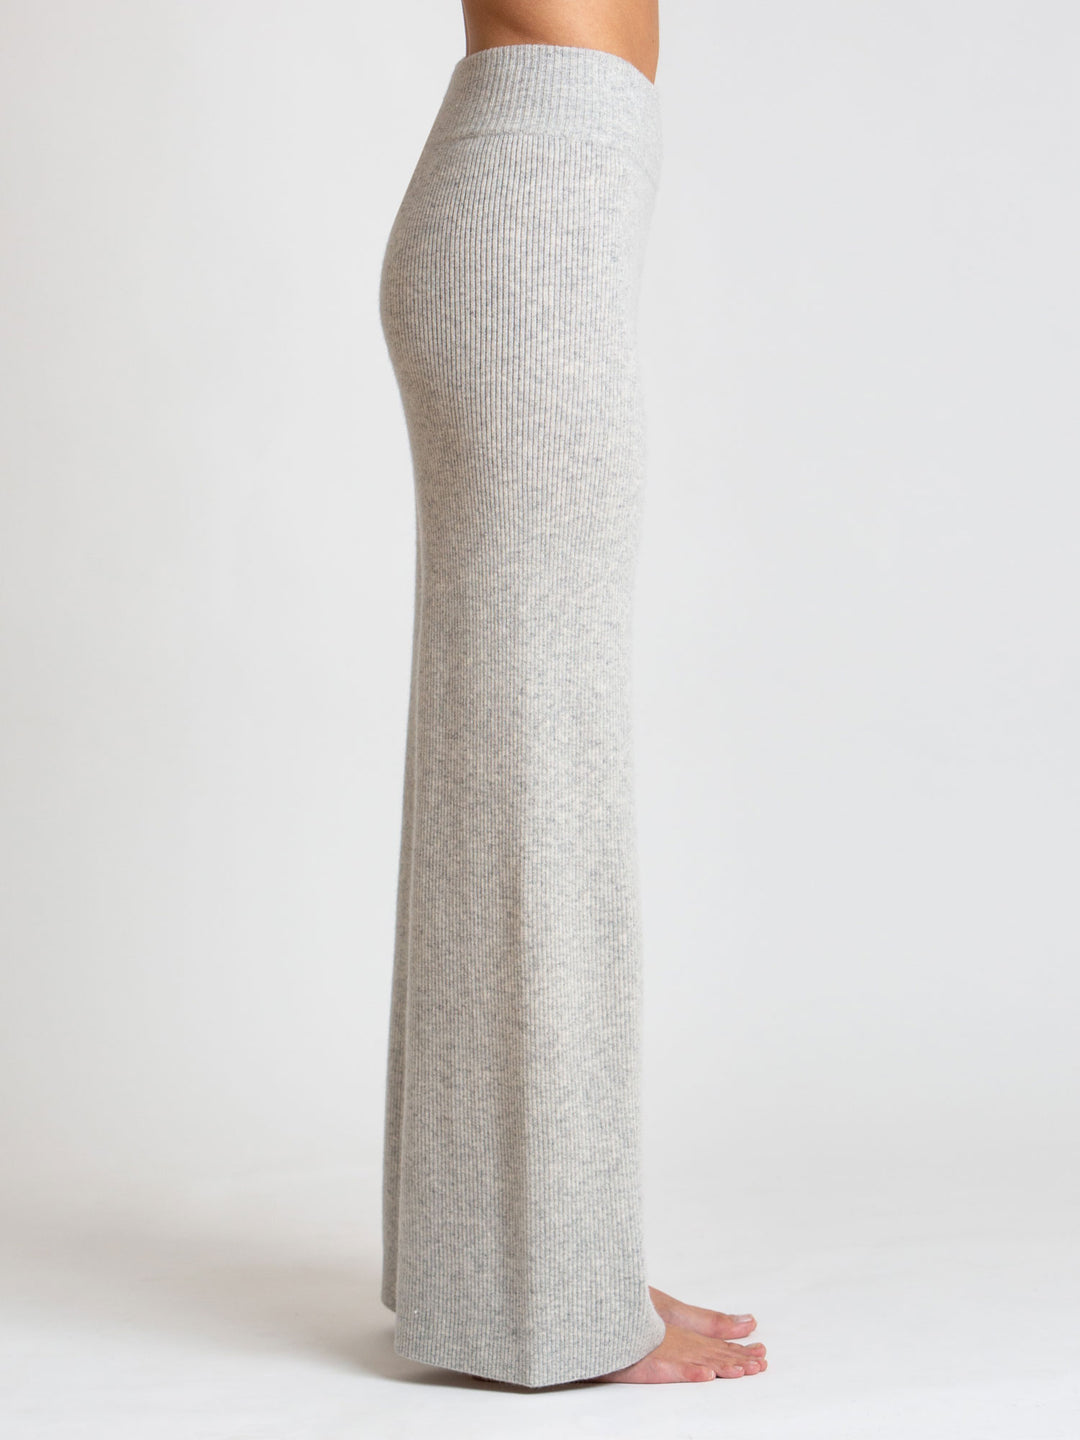 "North" cashmere pants in rib knit, 100% pure cashmere from Kashmina 